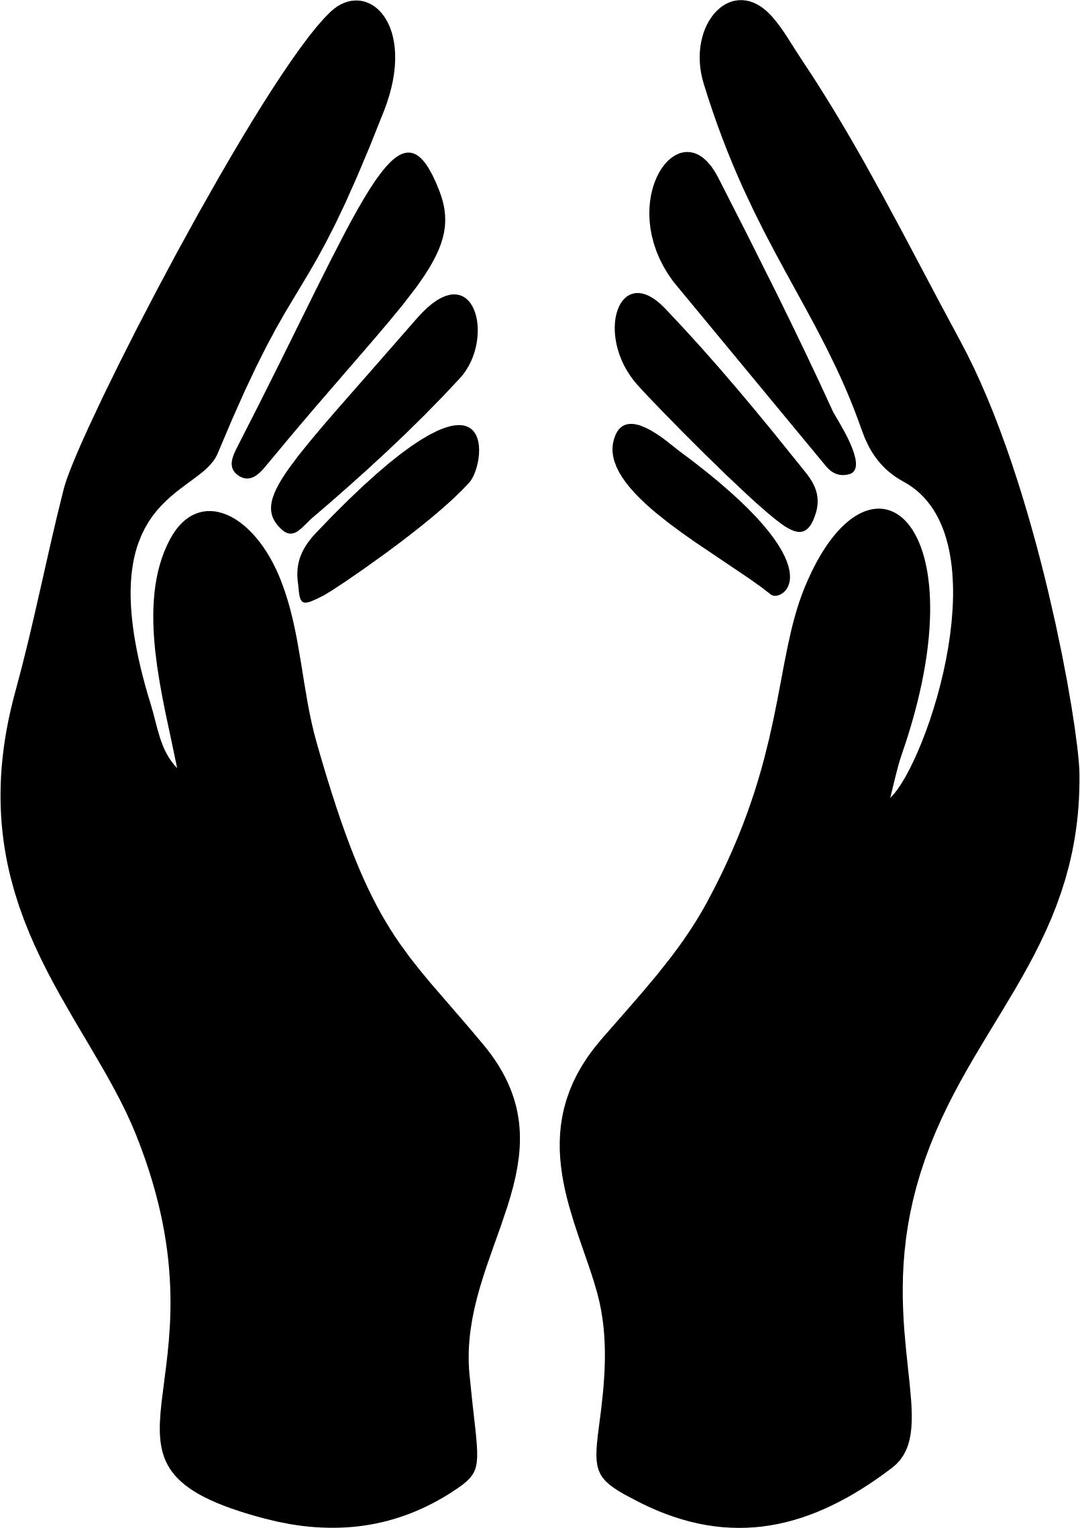 Two Hands Silhouette png transparent